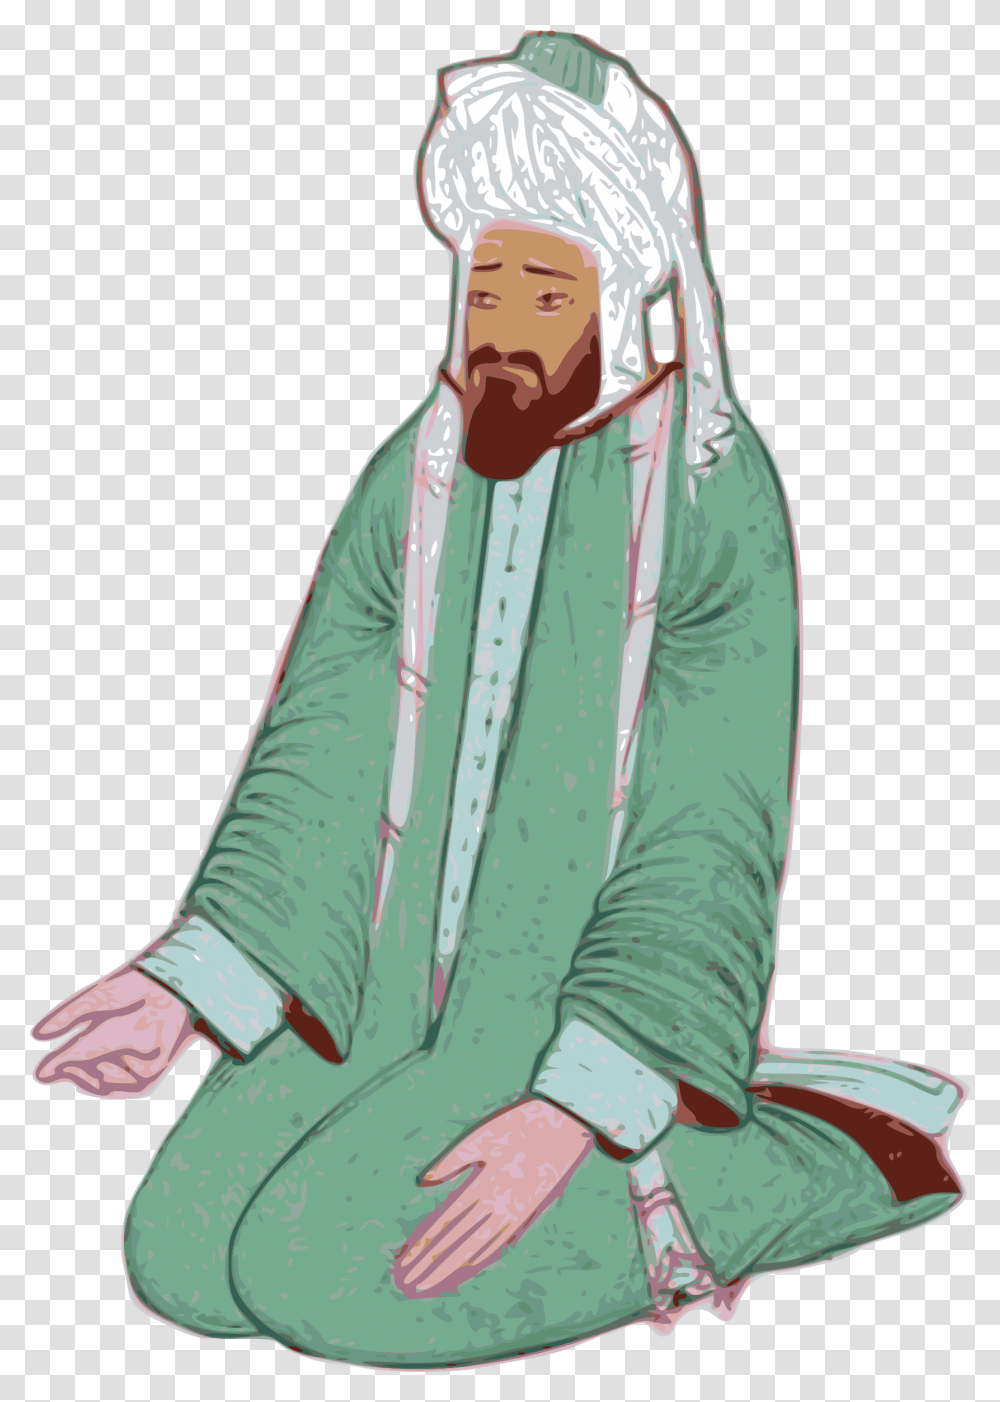 Muslim Man Clip Arts Iman Images In Islam, Apparel, Person, Fashion Transparent Png